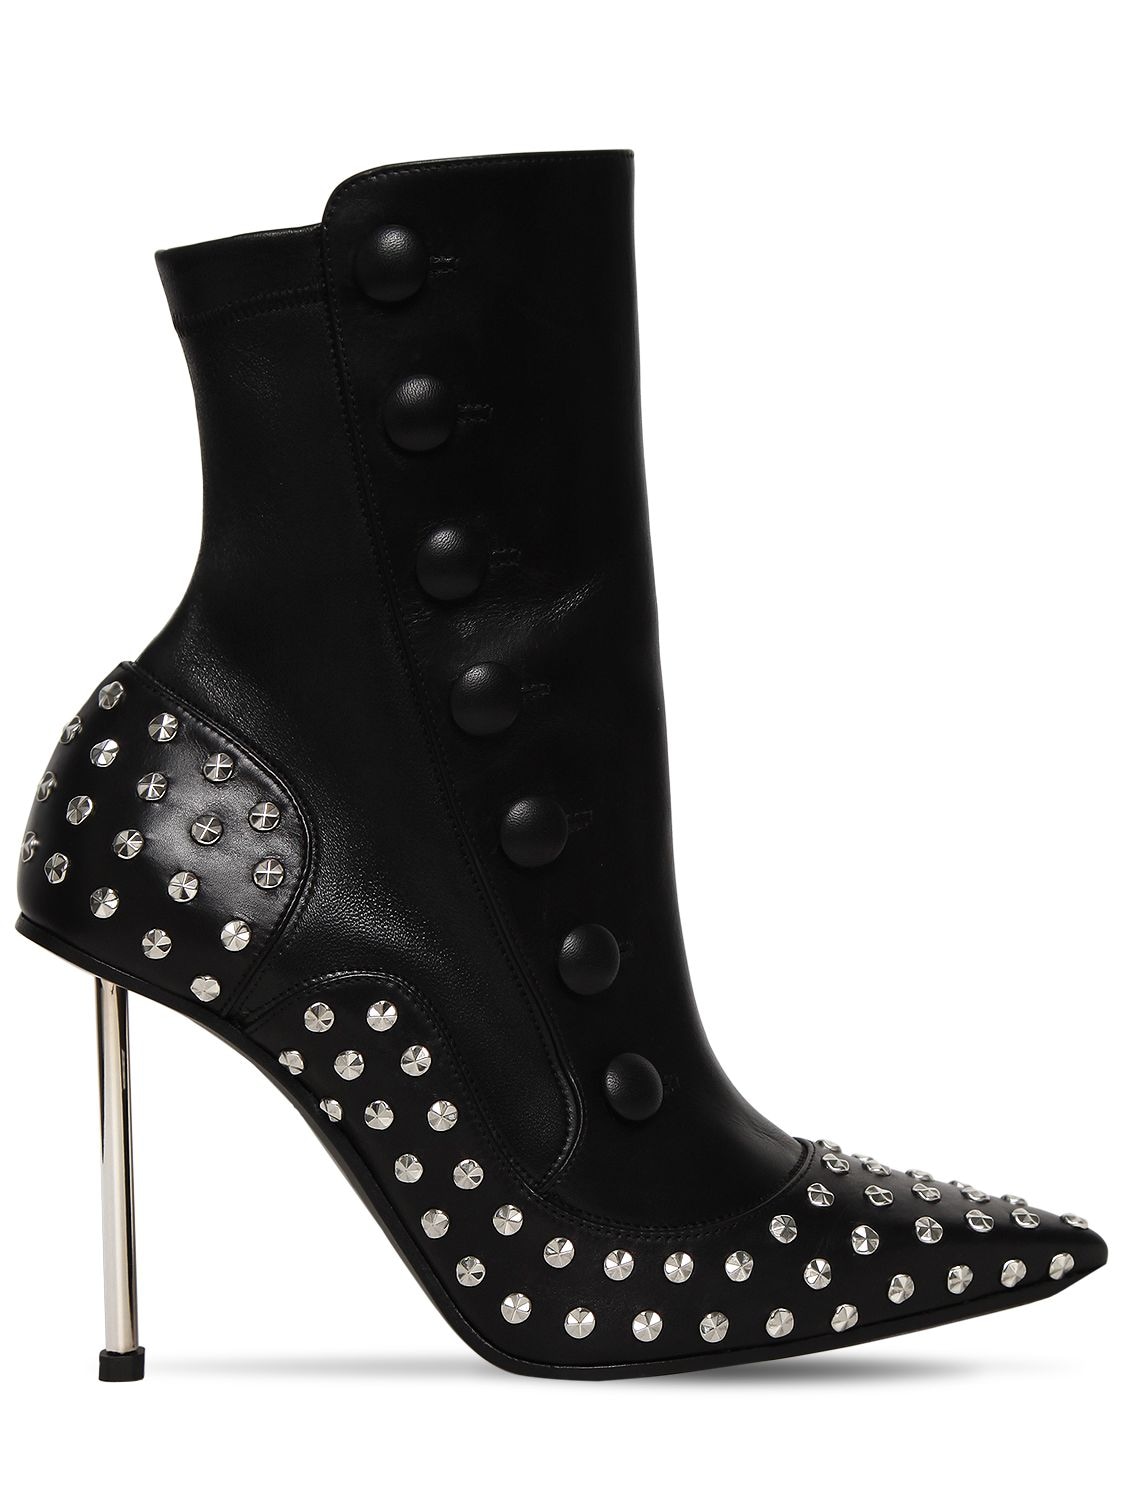 ALEXANDER MCQUEEN 105MM STUDDED LEATHER BOOTS,69IG14007-MTA4MQ2